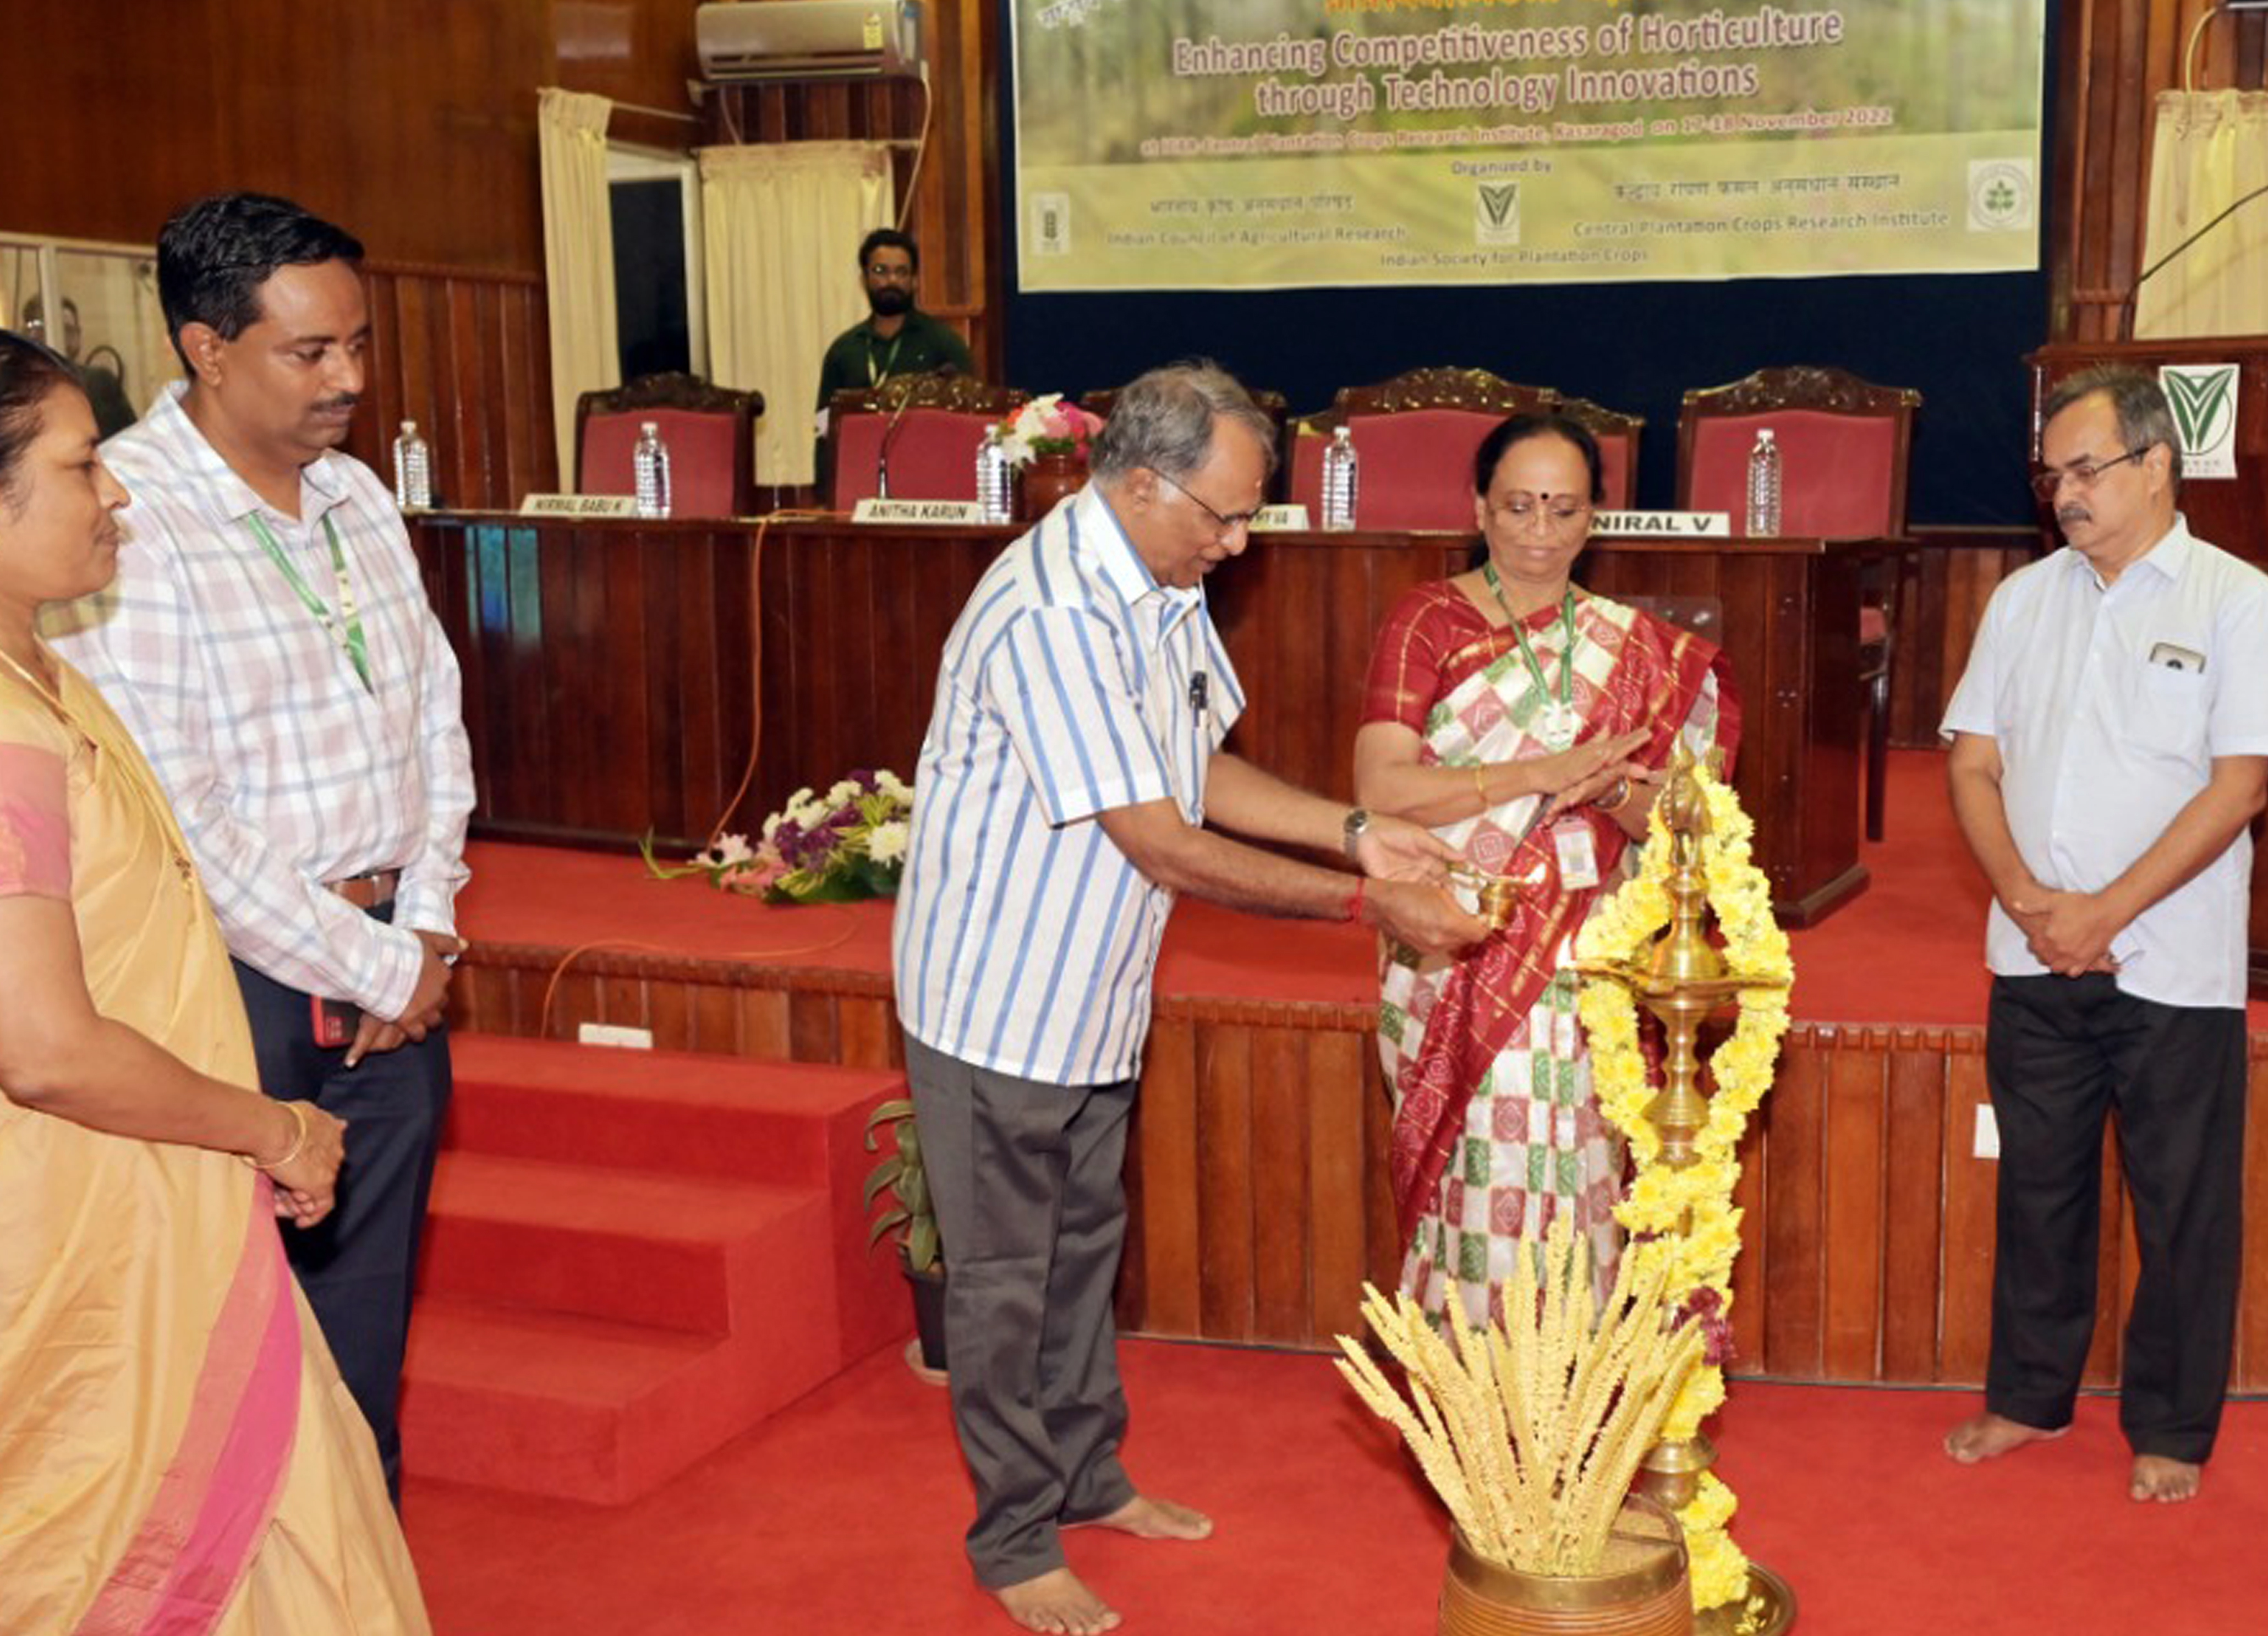 Photo for National Conference on Enhancing Competitiveness of Horticulture through Technology Innovations